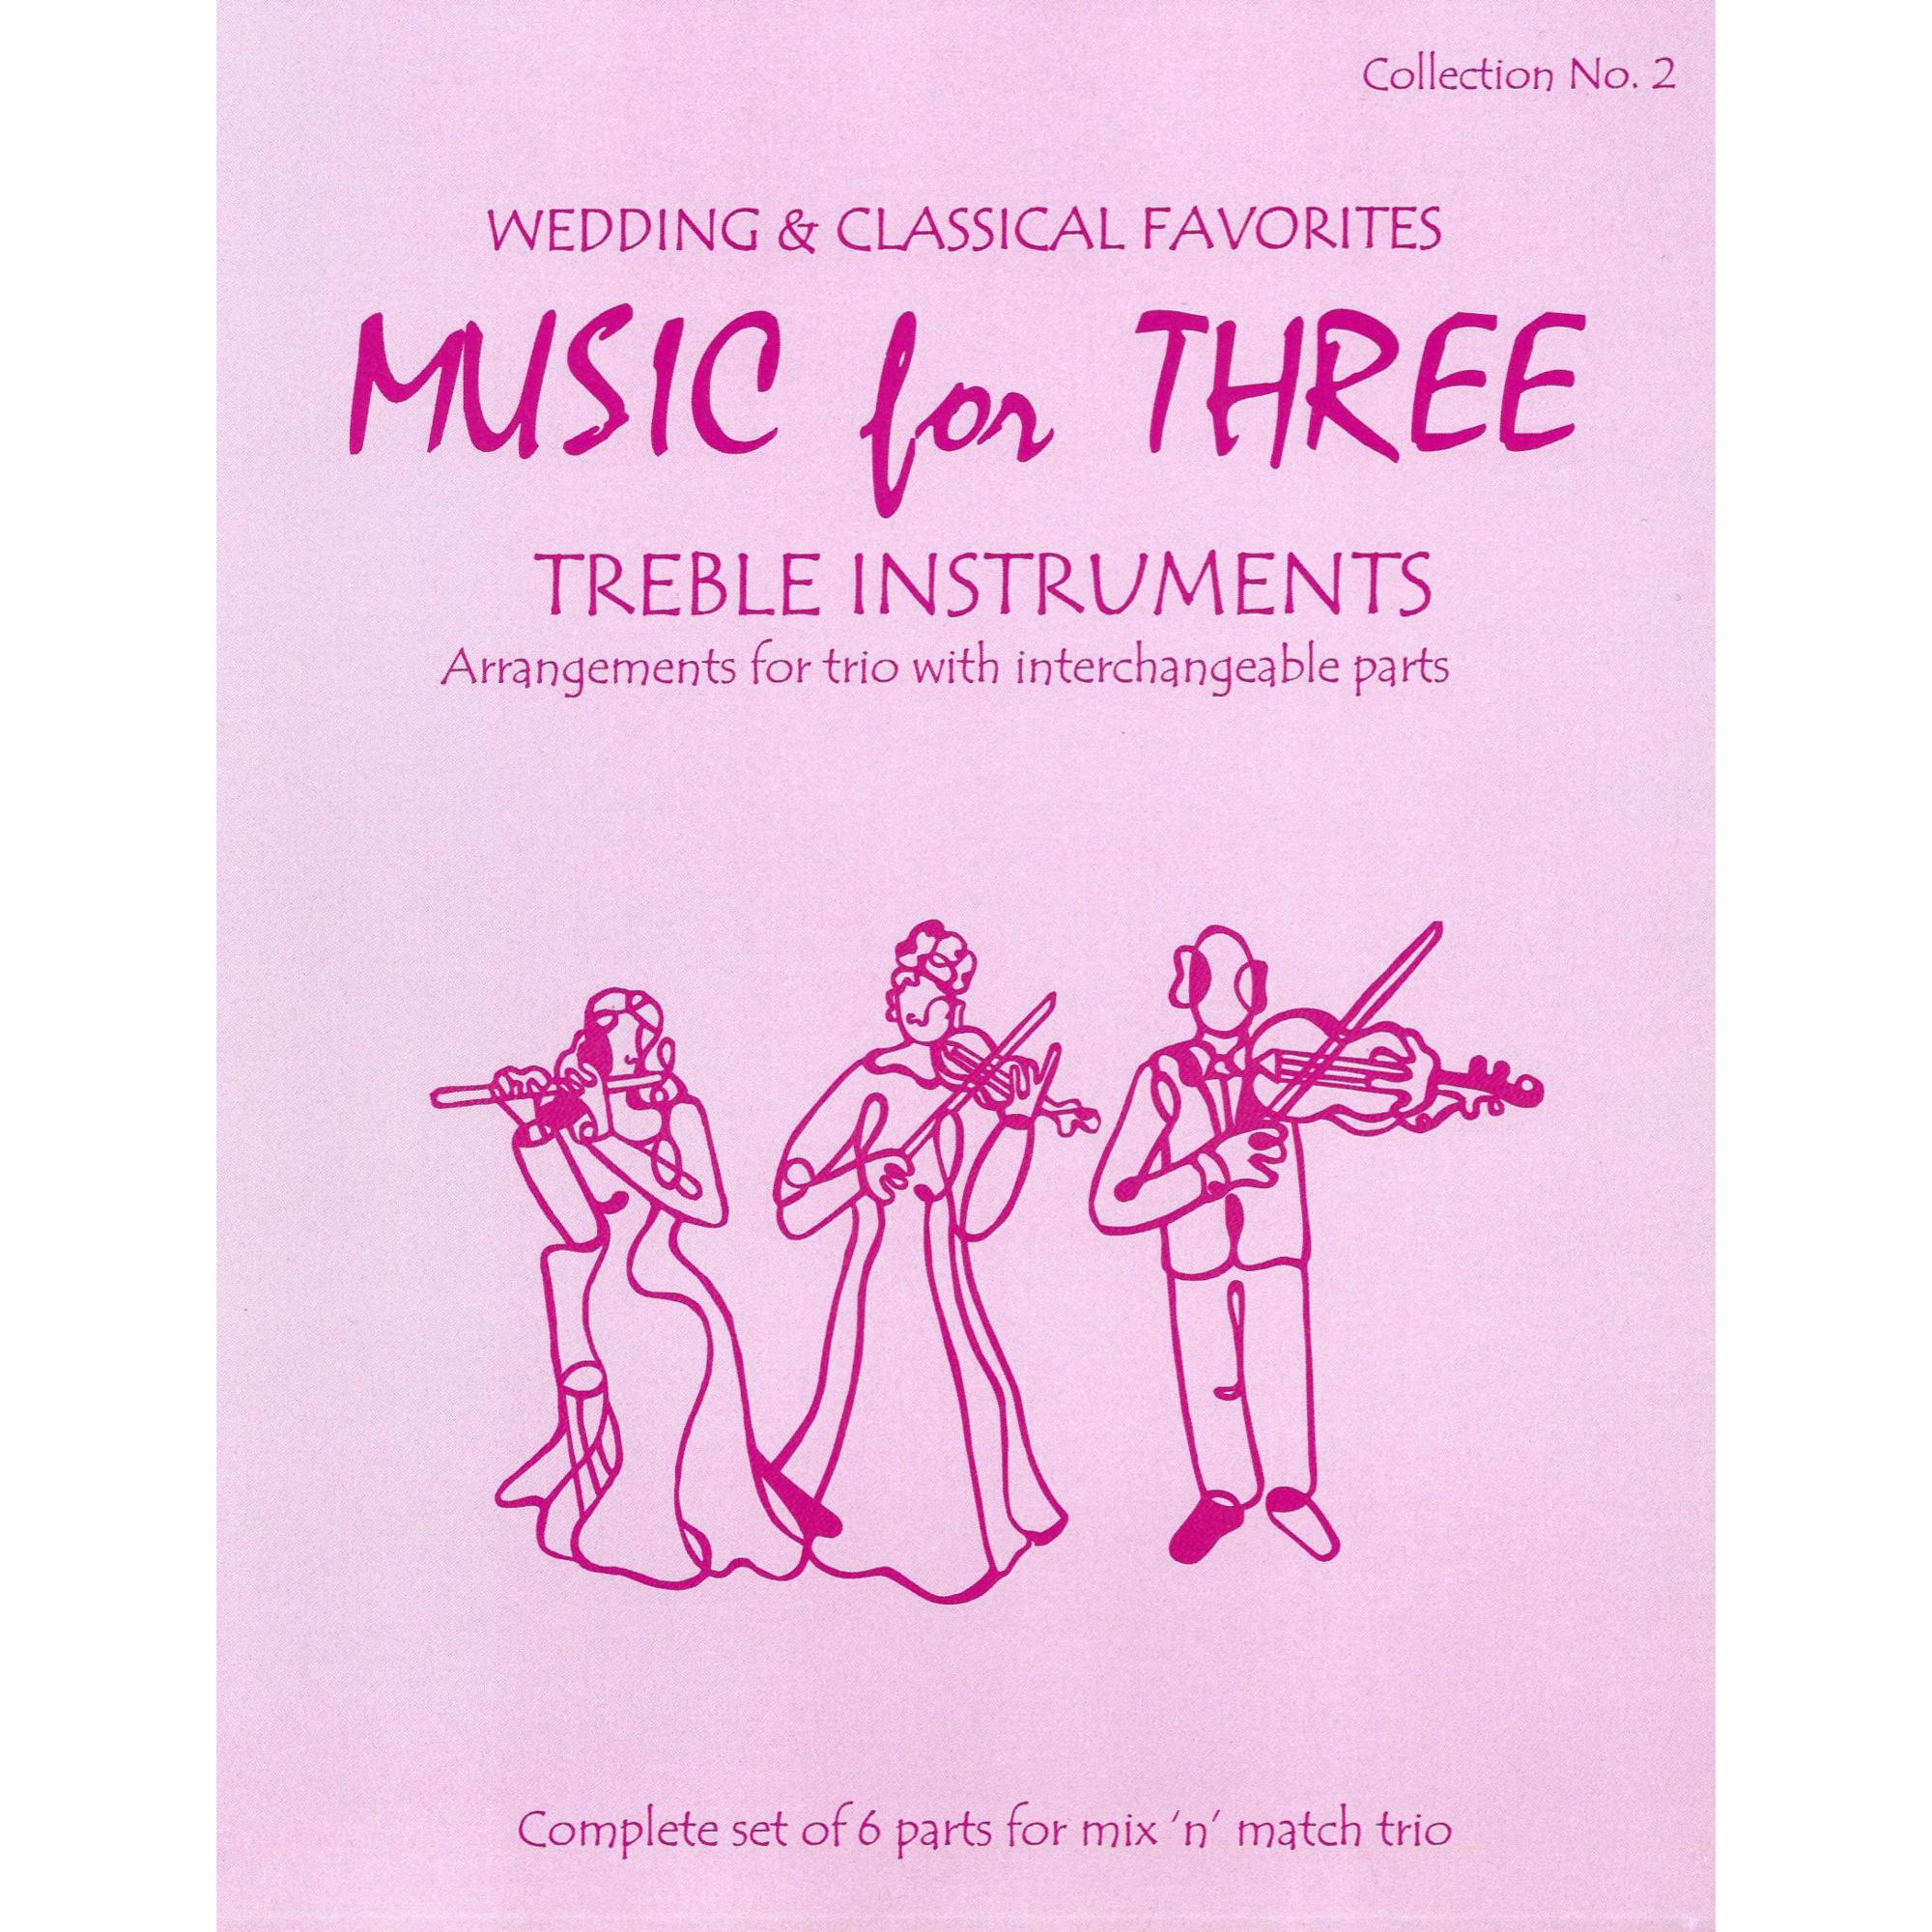 Music for Three Treble Instruments, Collection 2